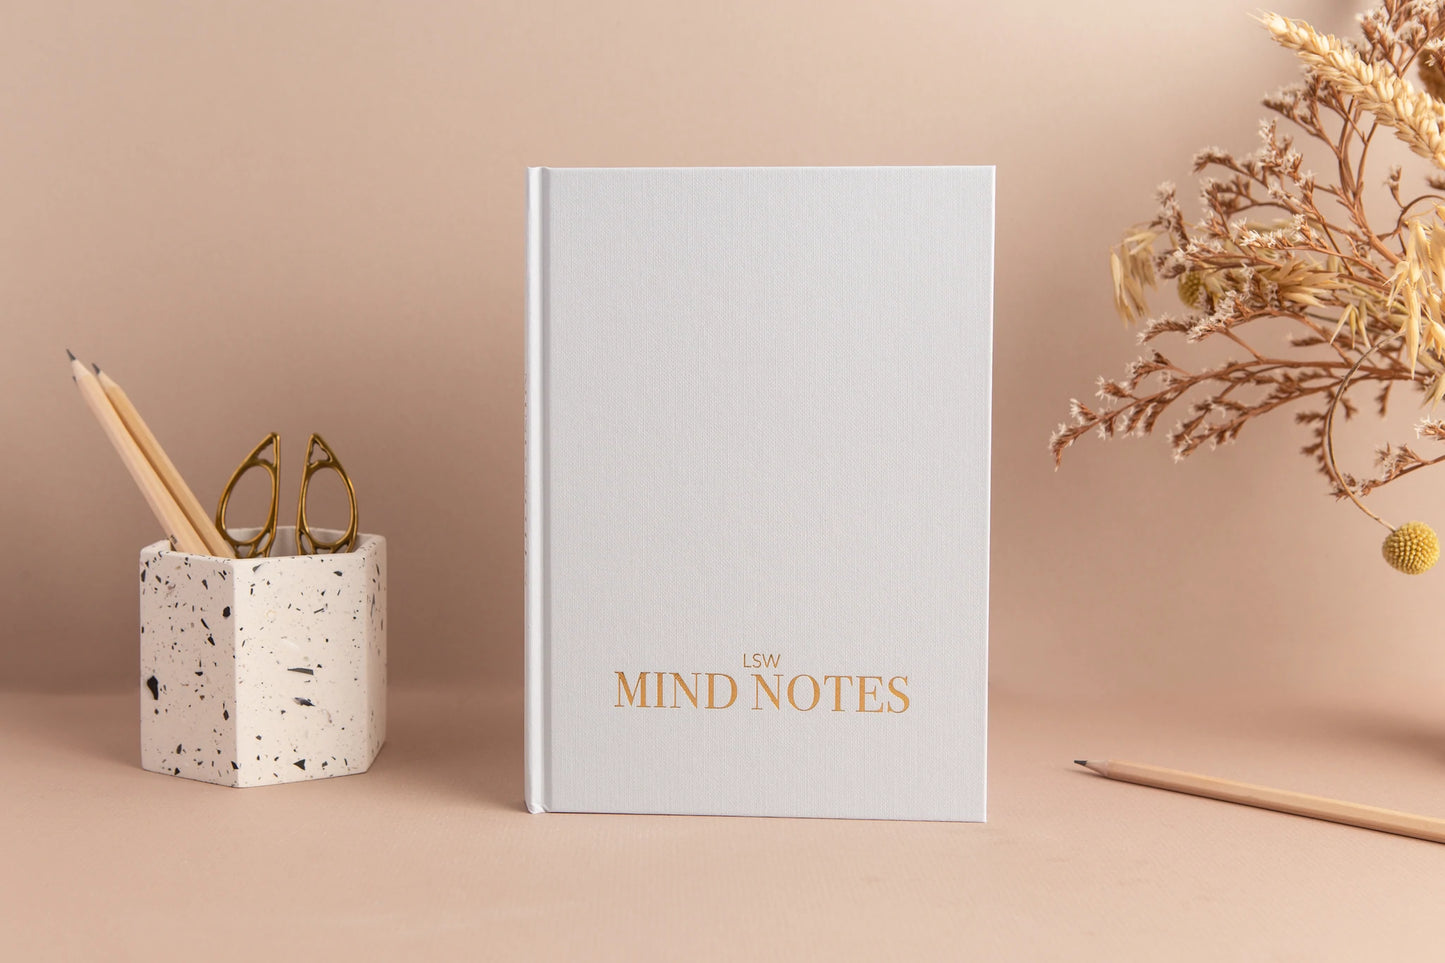 LSW Mind Notes by LSW London